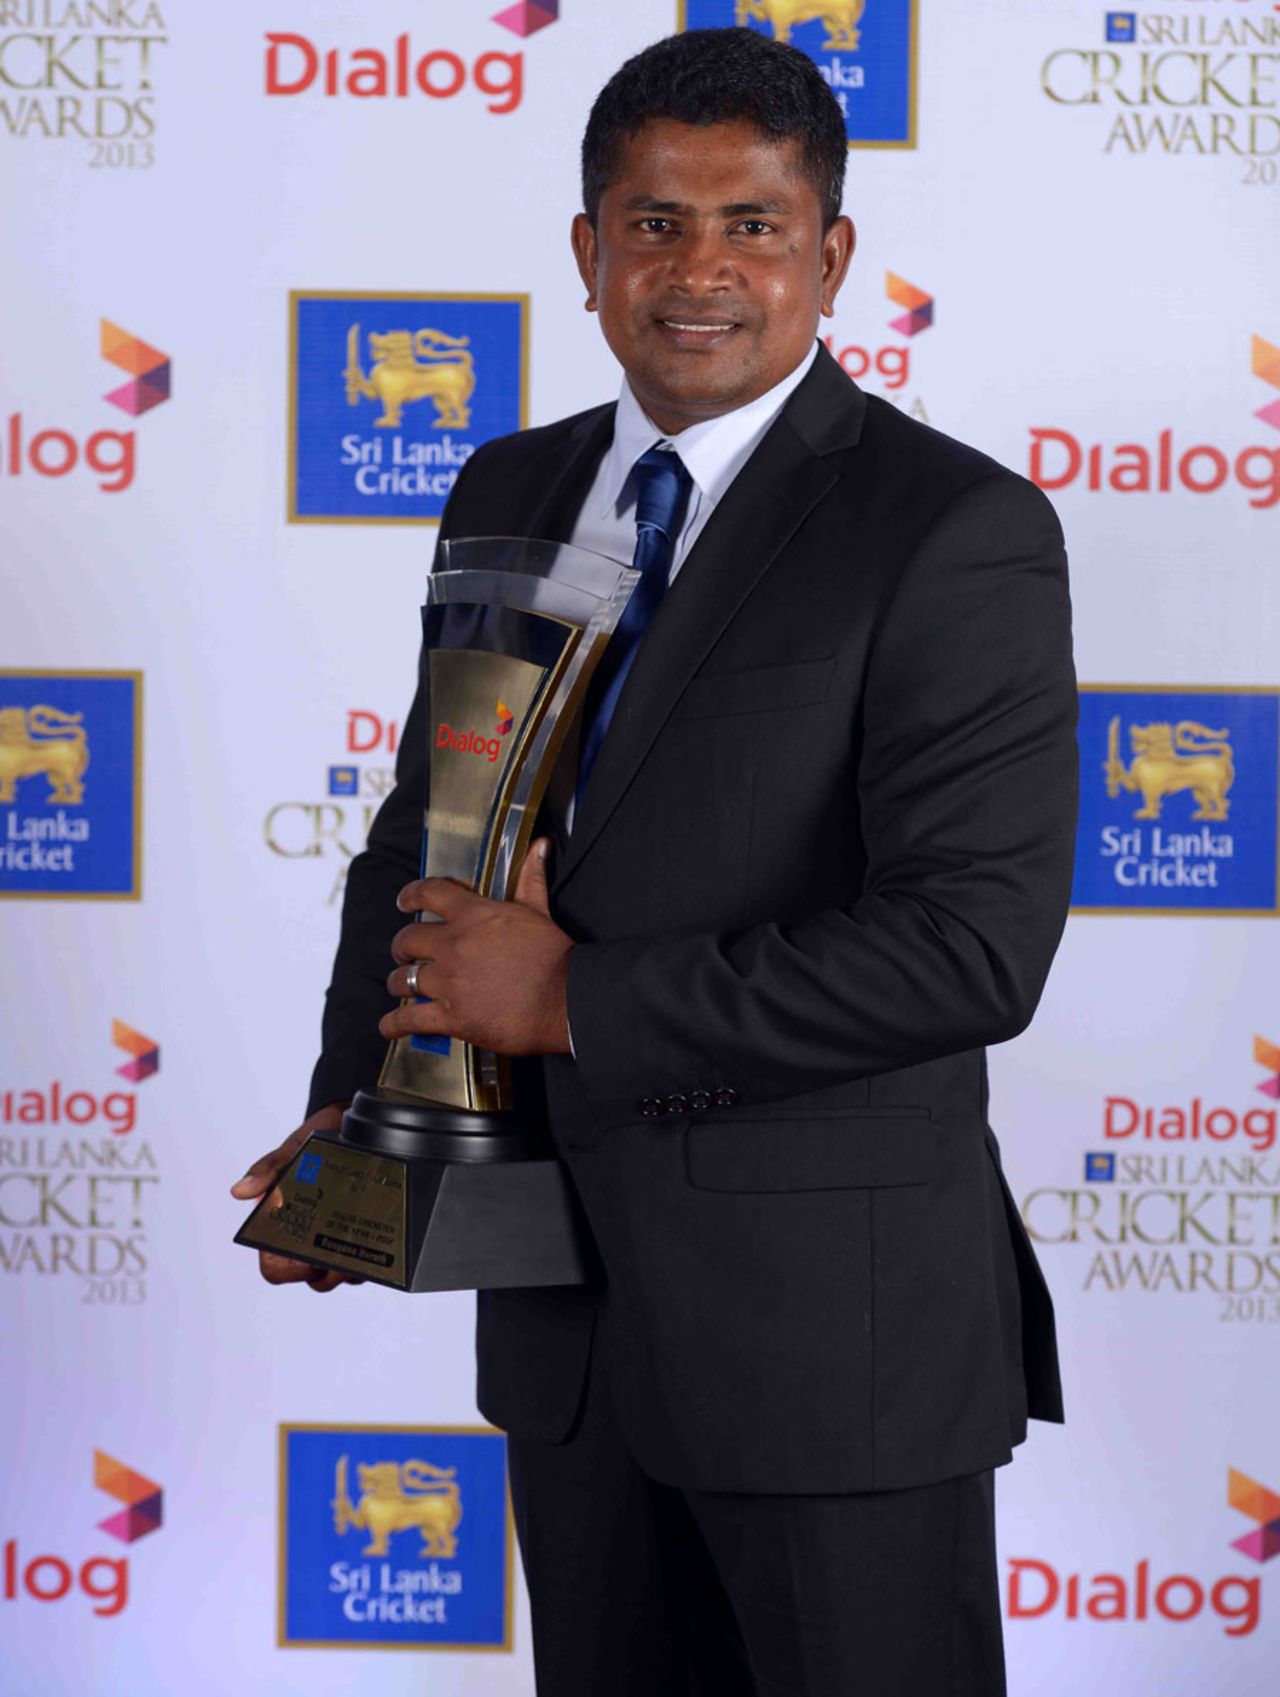 Rangana Herath was named as the men's Cricketer of the Year at the SLC awards, Colombo, September 10, 2013